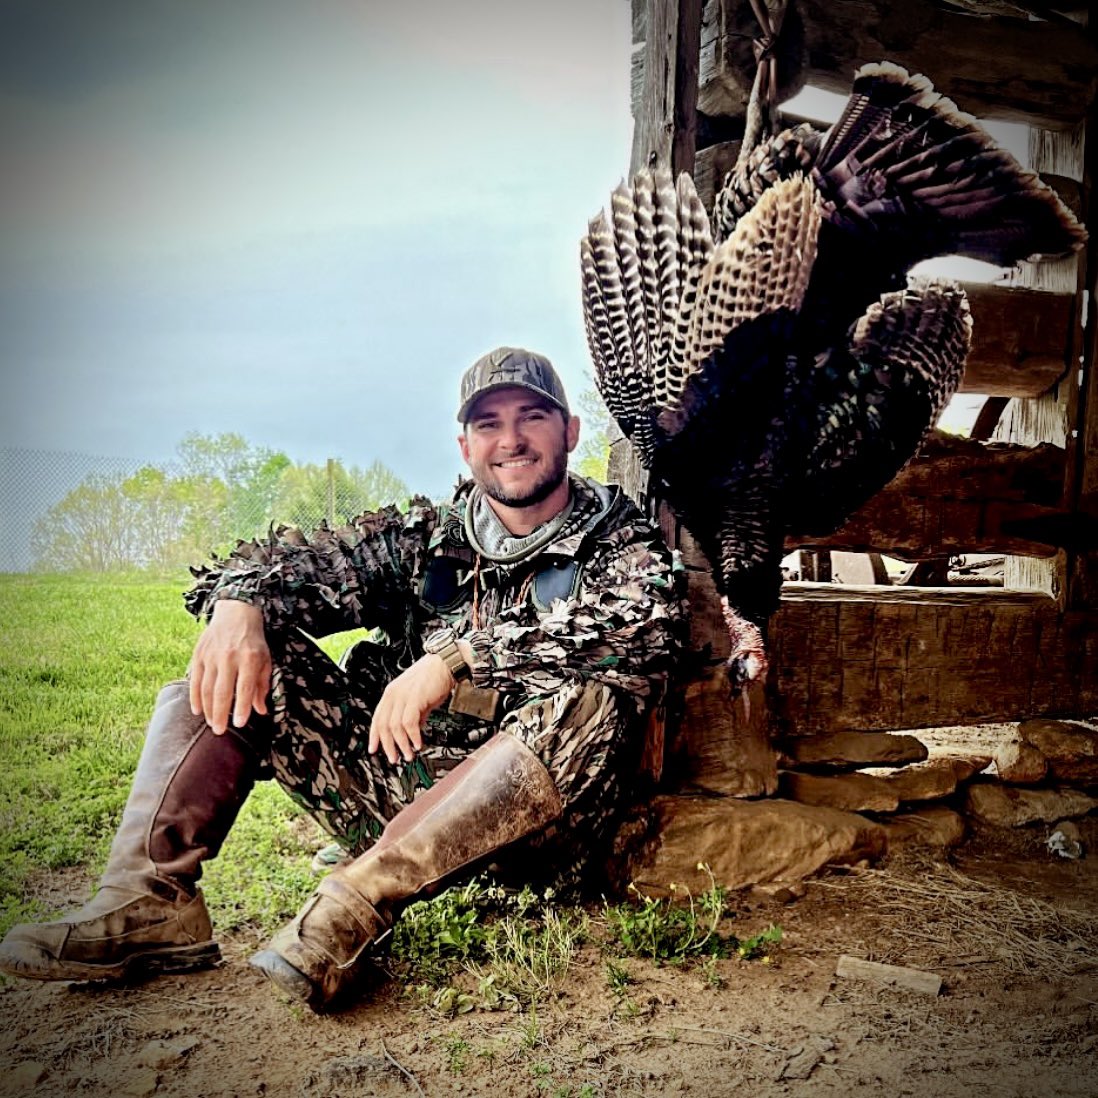 Feels good to get on the board..... who else is winning this season???

@jchrismon28 tagging his 1st this season!

#turkeysarelife #turkeyseason #letsgo #turkeyhunter #itsalifestyle #afwlifestyle #afwoutdoors #afwaterfowl